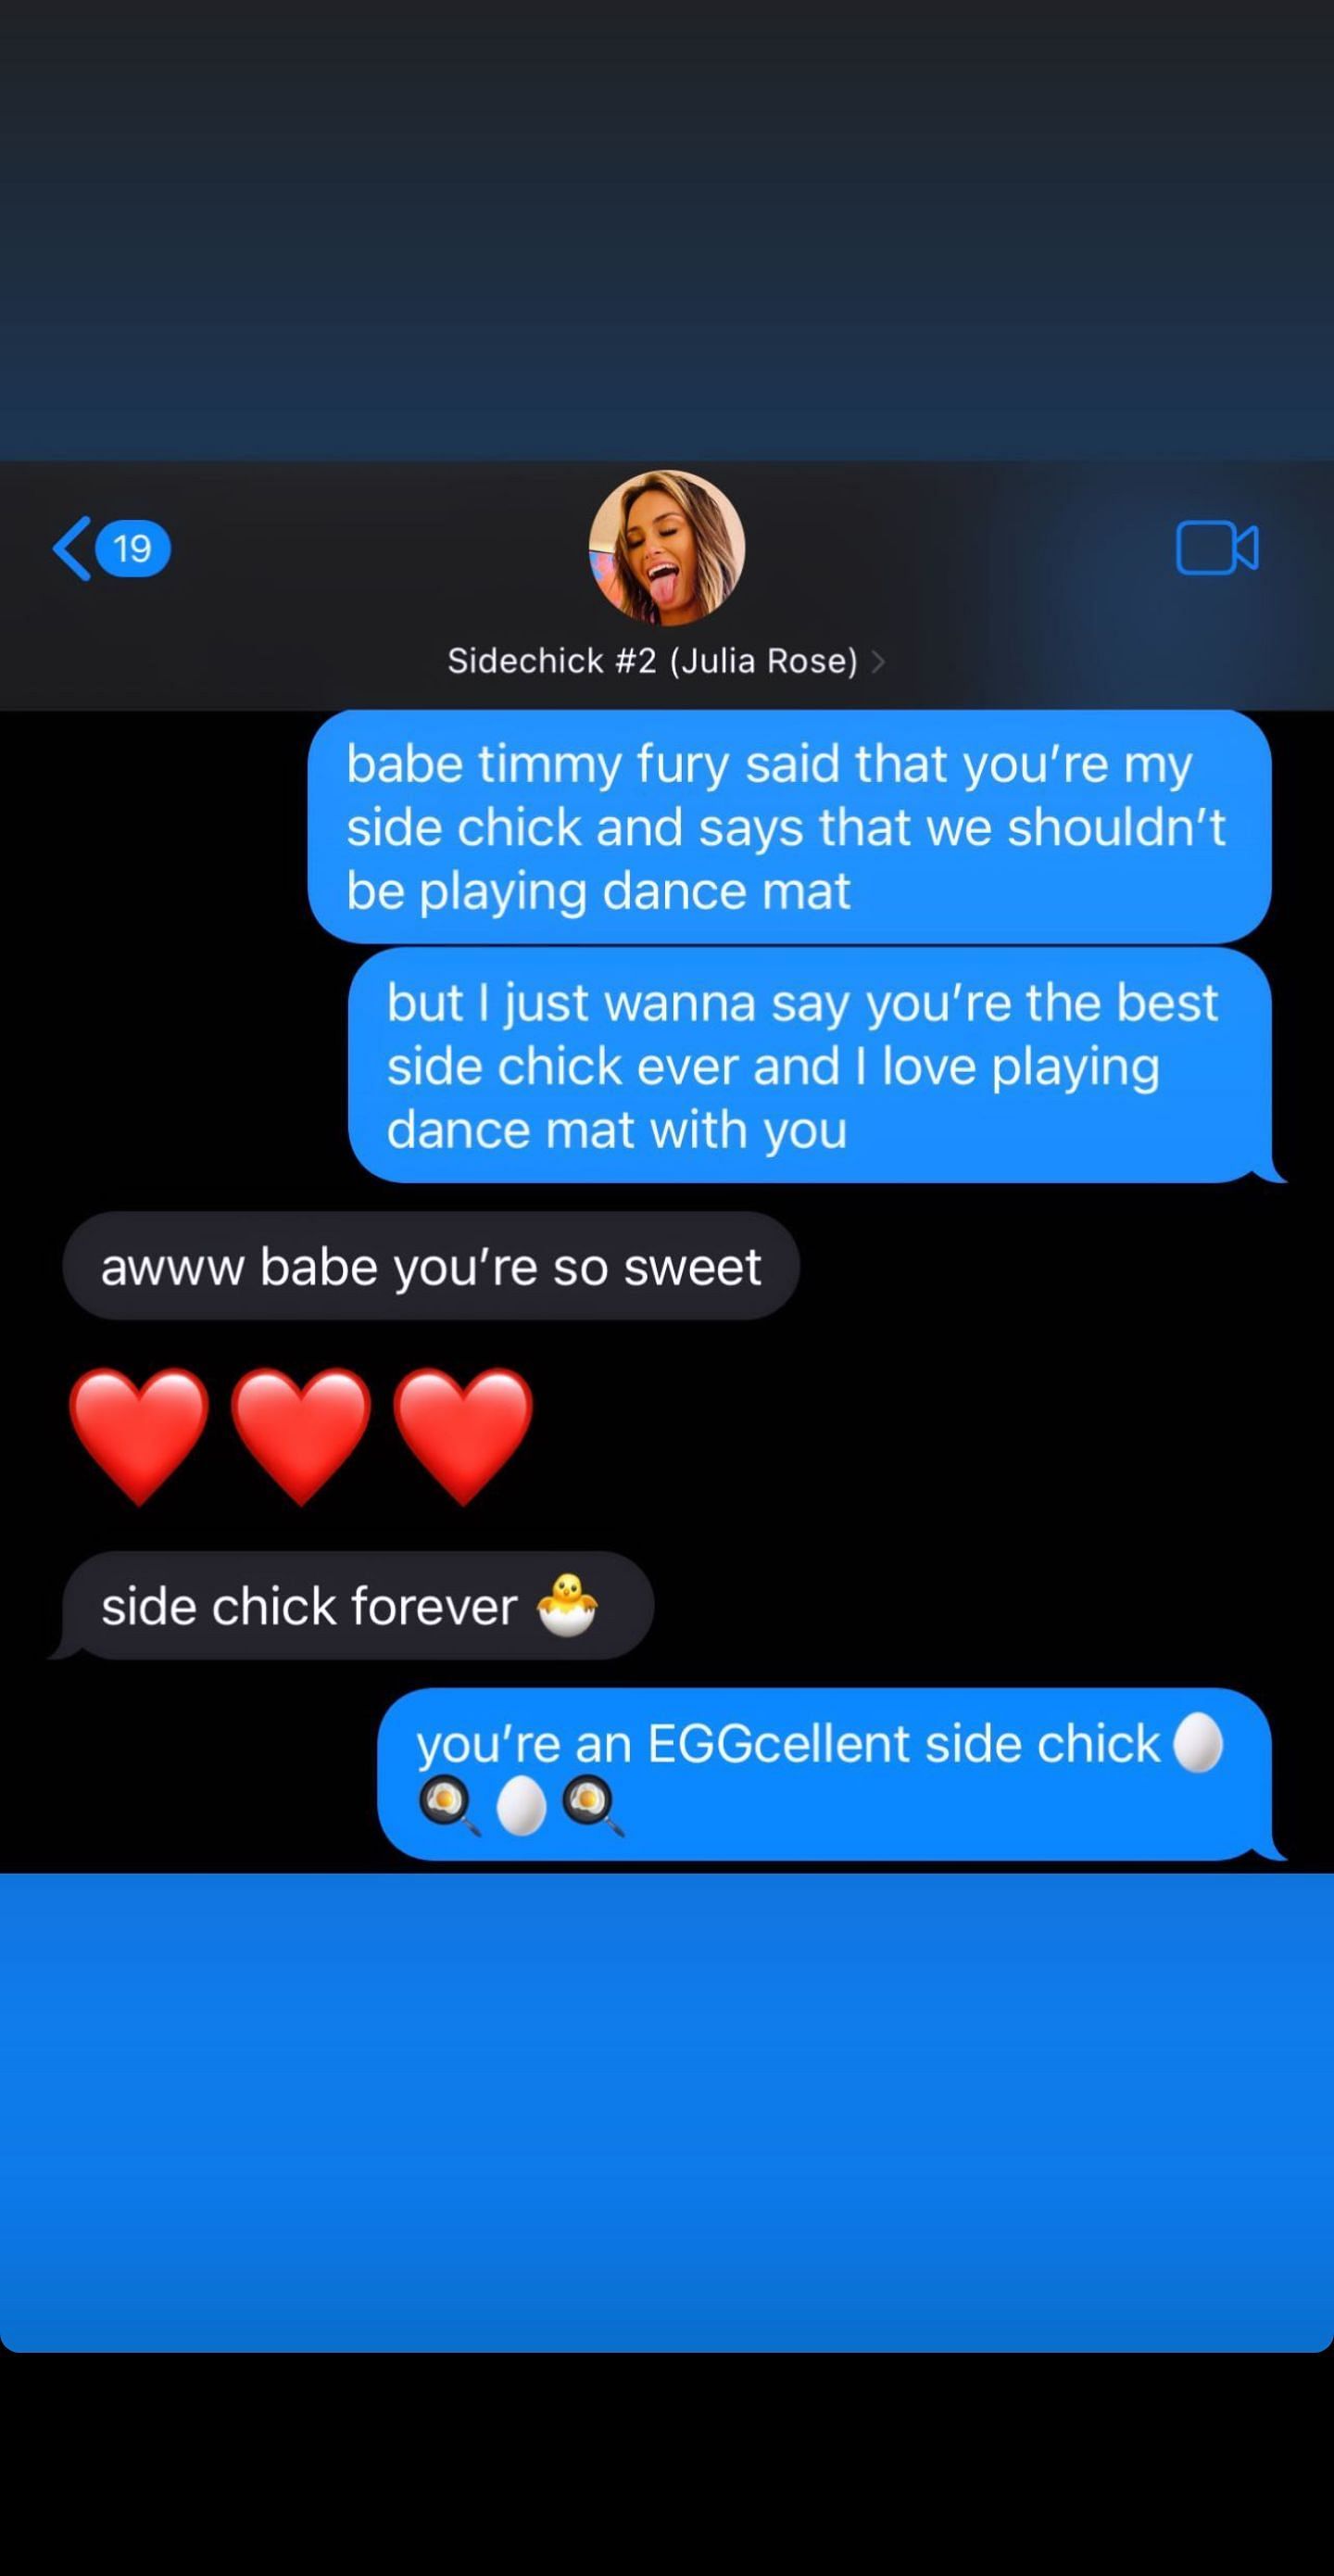 Jake Paul&#039;s Instagram story containing a DM with girlfriend Julia Rose